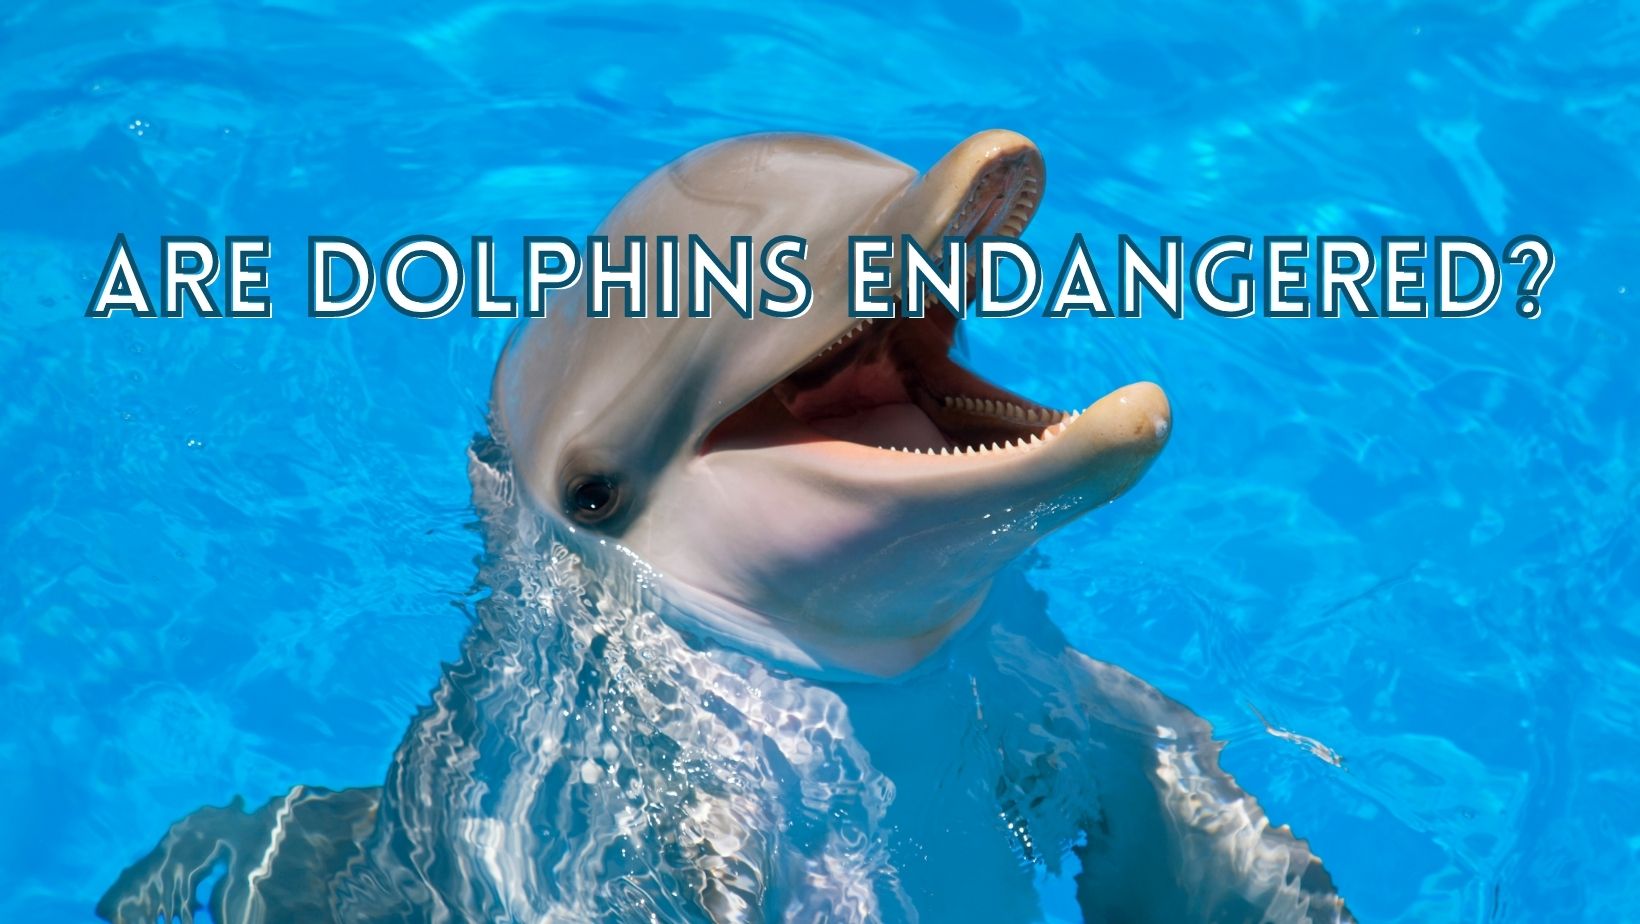 Are dolphins endangered